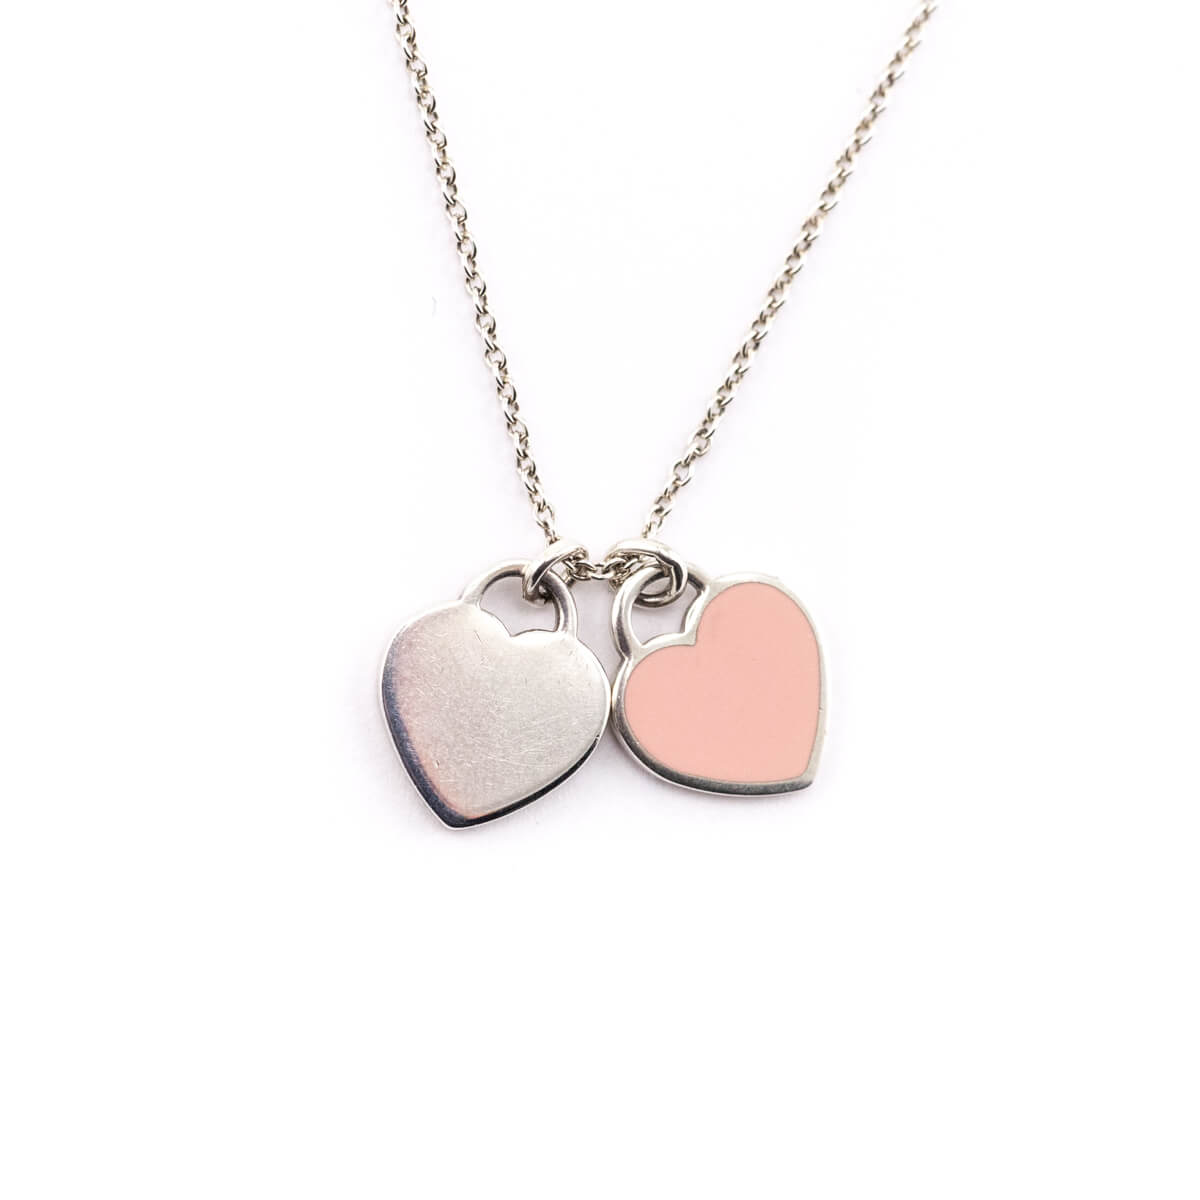 Return to Tiffany™ mini double heart tag pendant in silver with pink enamel  finish.